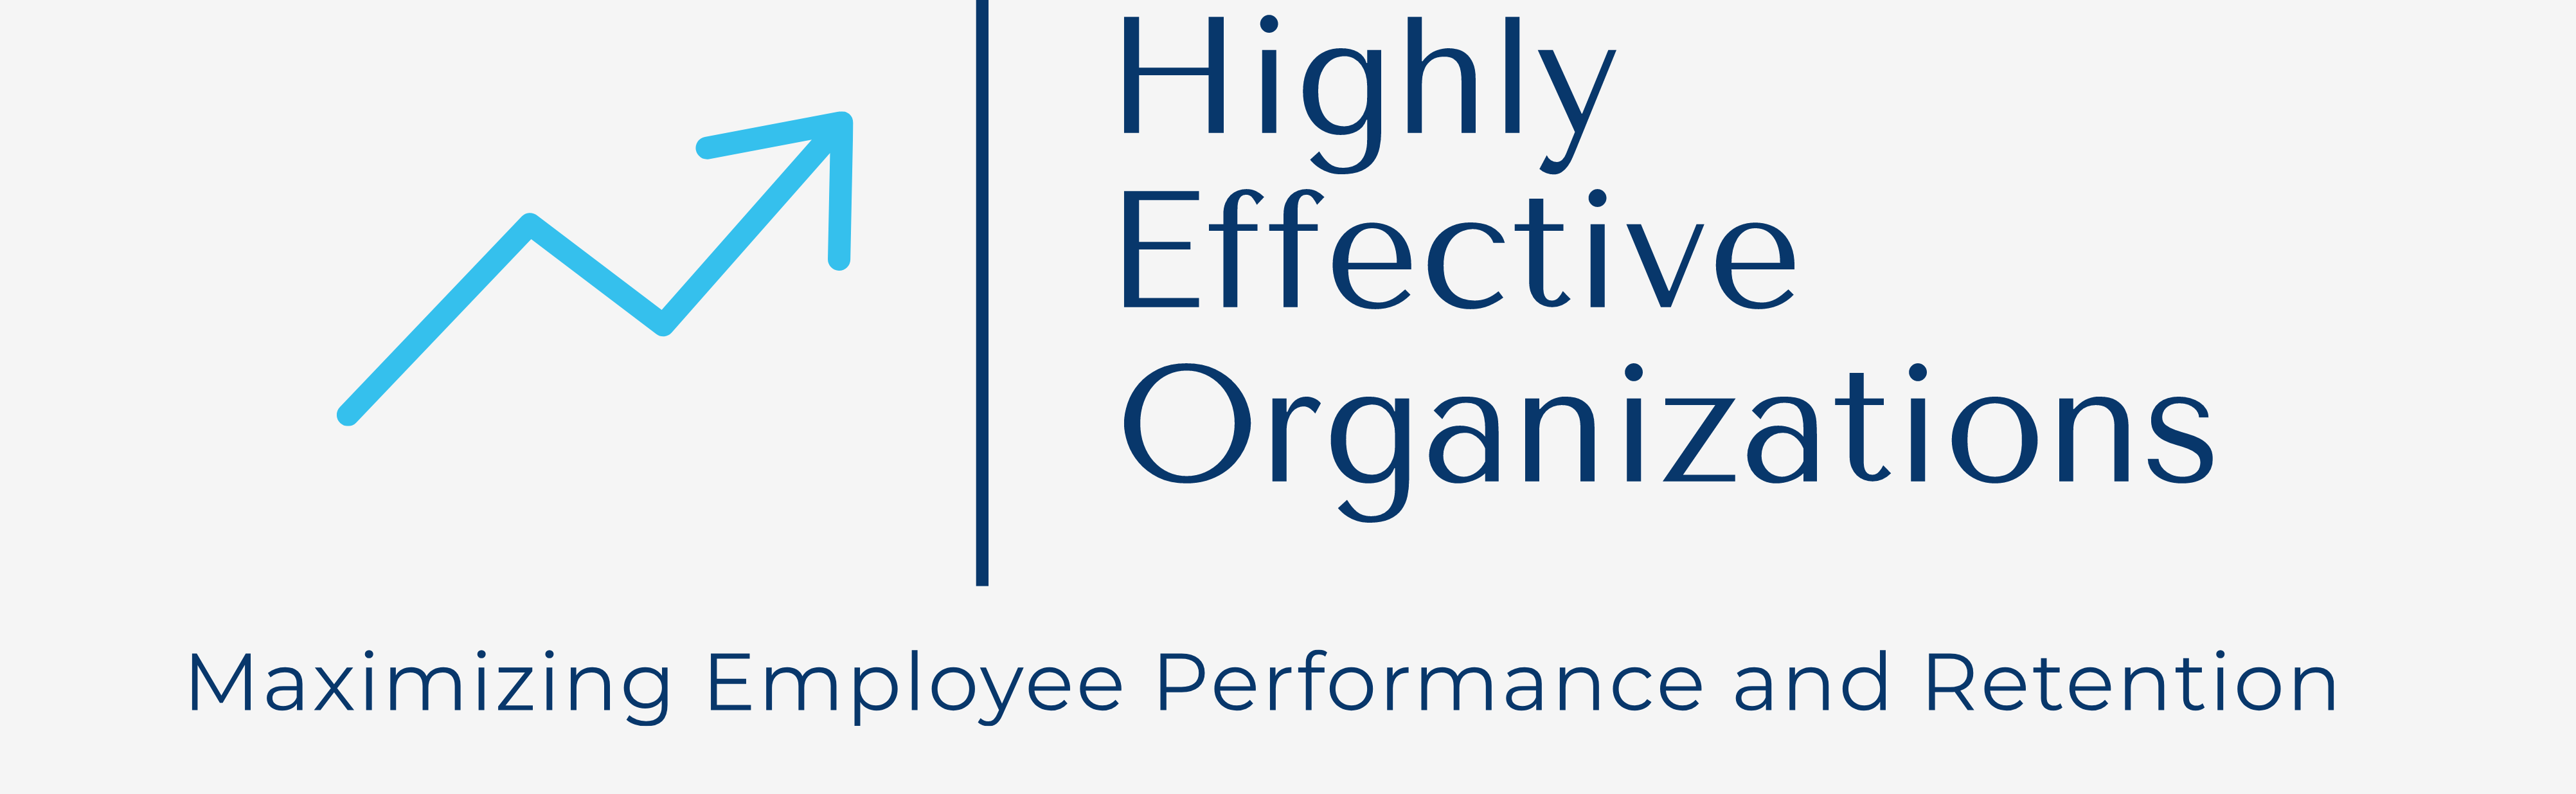 Highly Effective Organizations